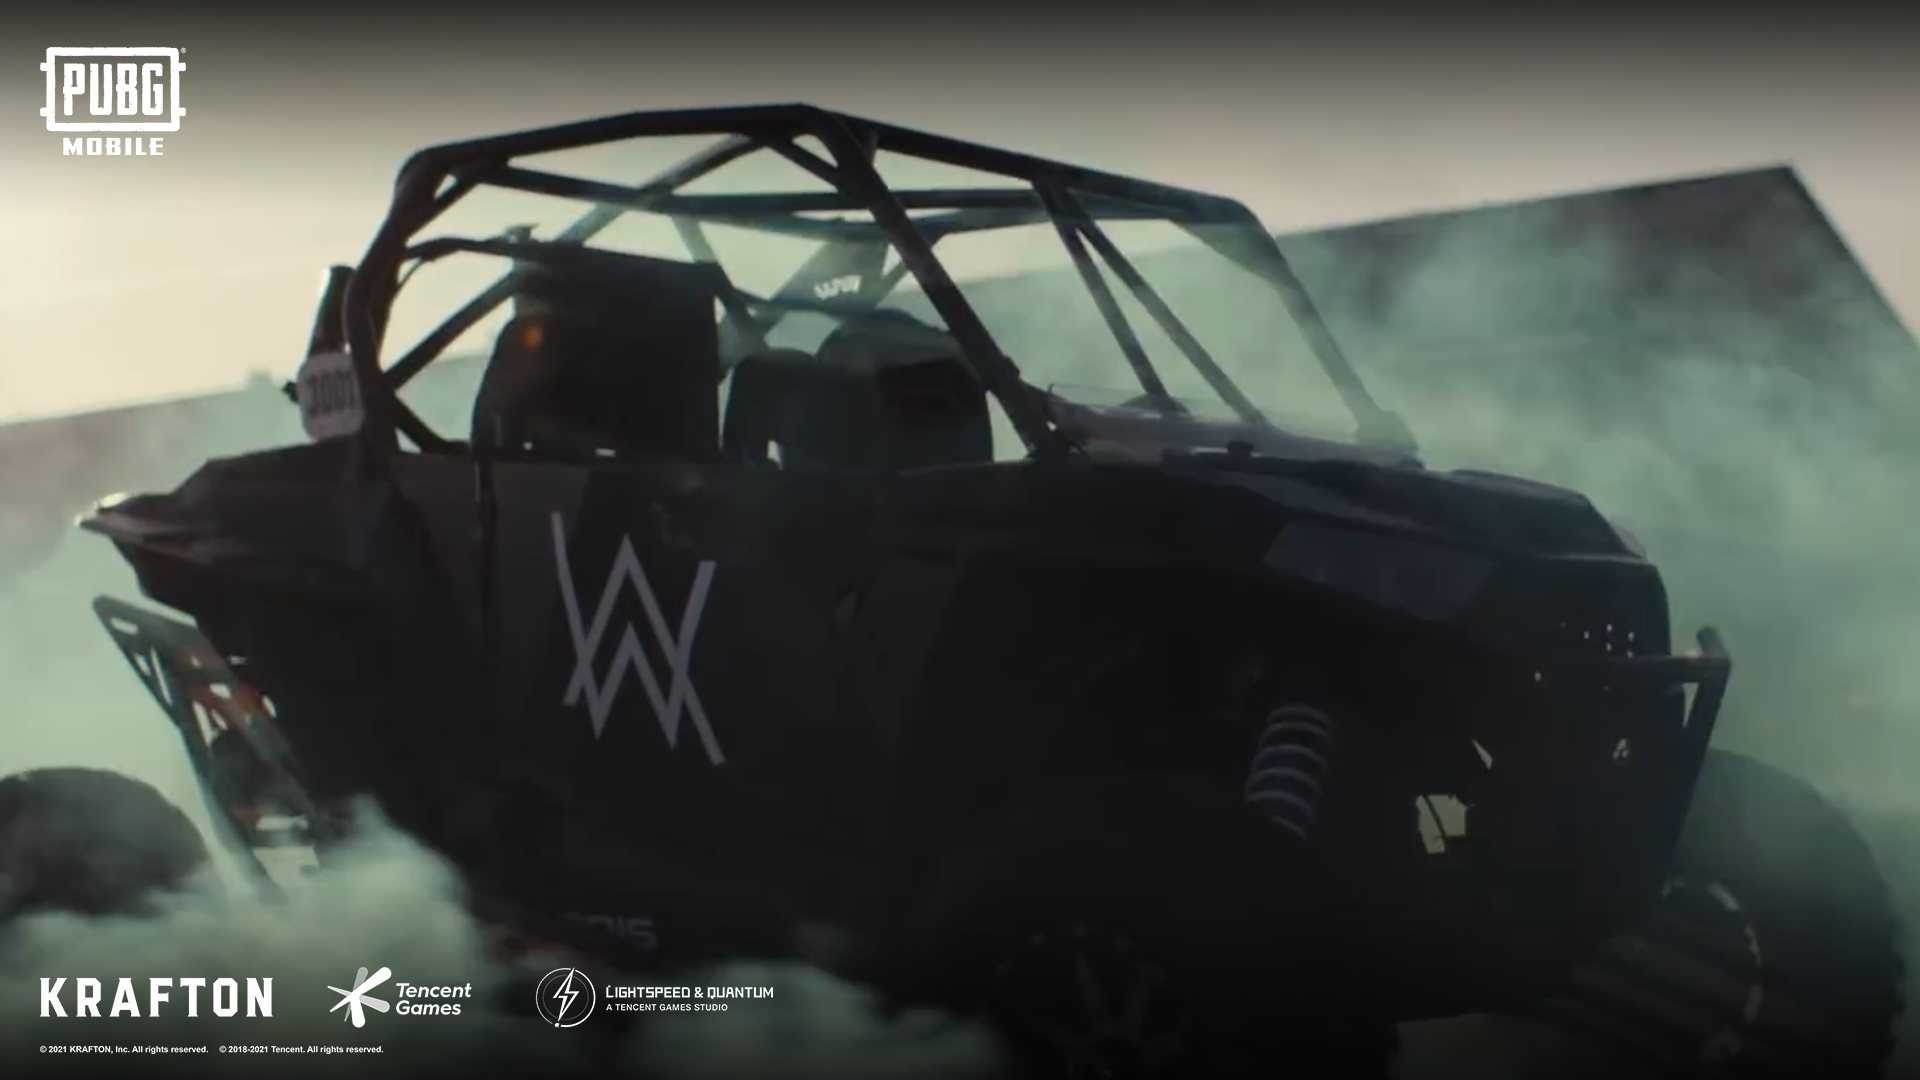 Enjoy the Crate Day with Alan Walker. Don't forget to unlock the PUBG